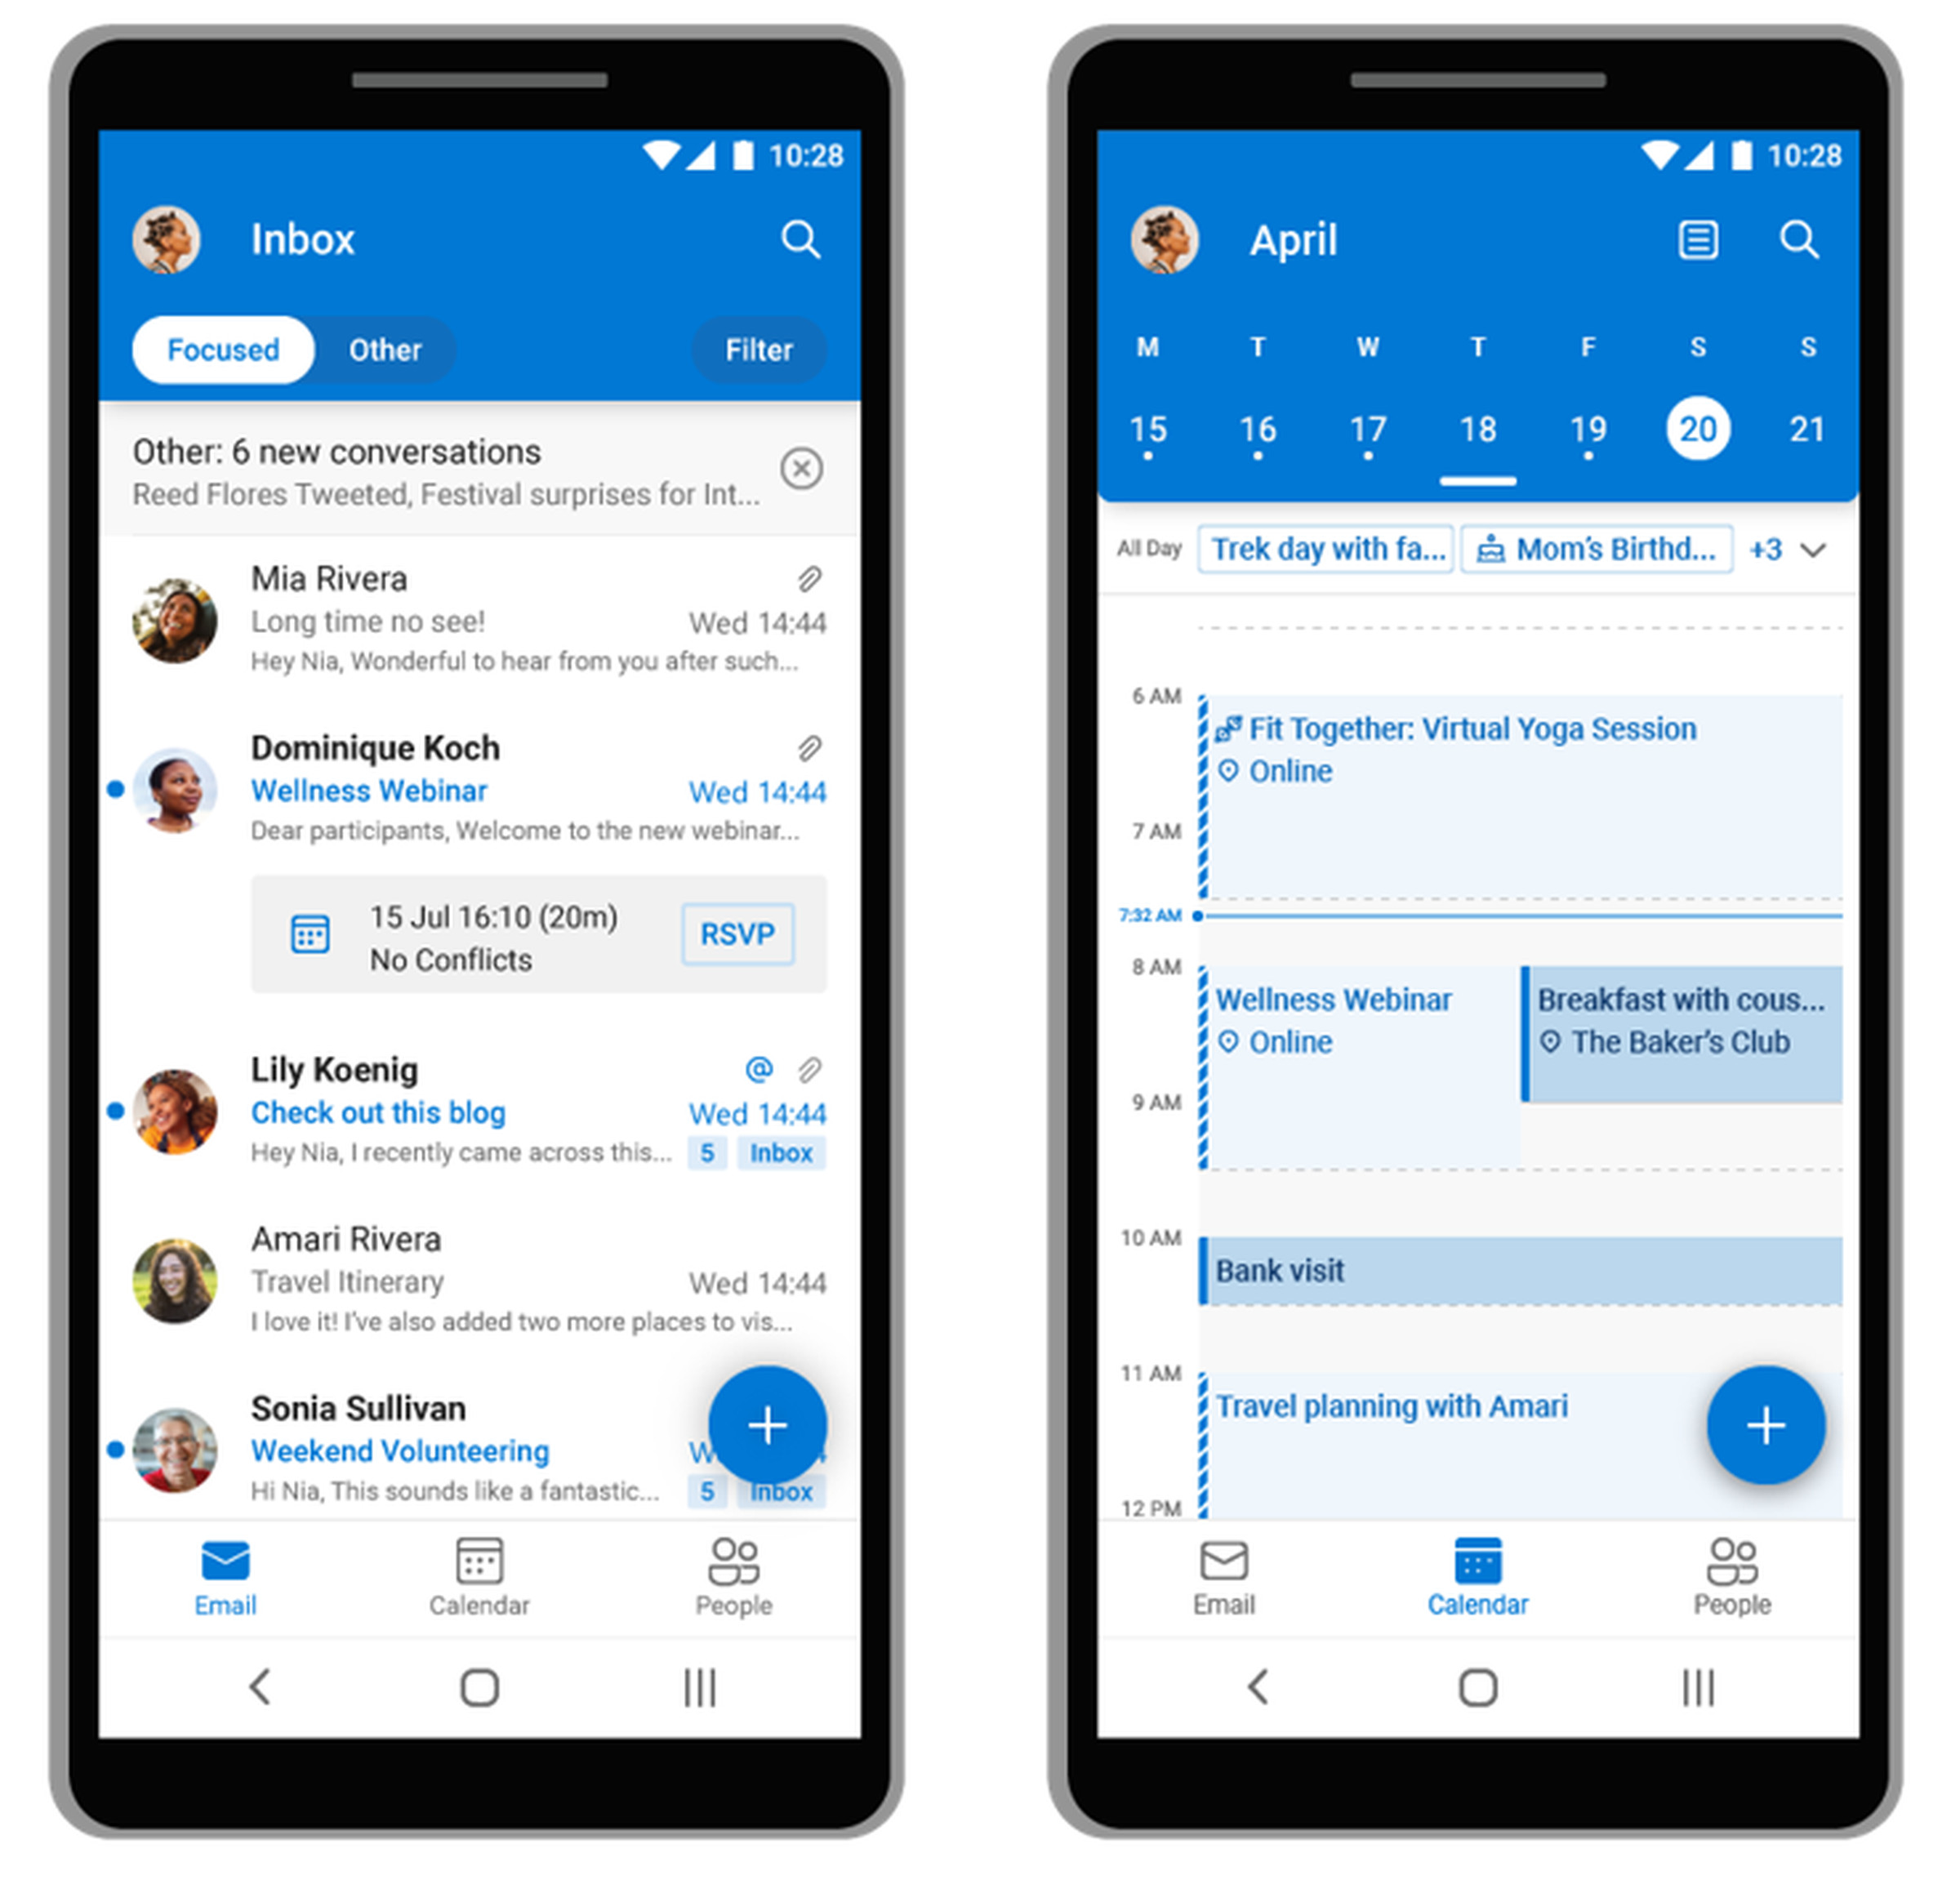 Outlook Lite supports all of the main Outlook features.